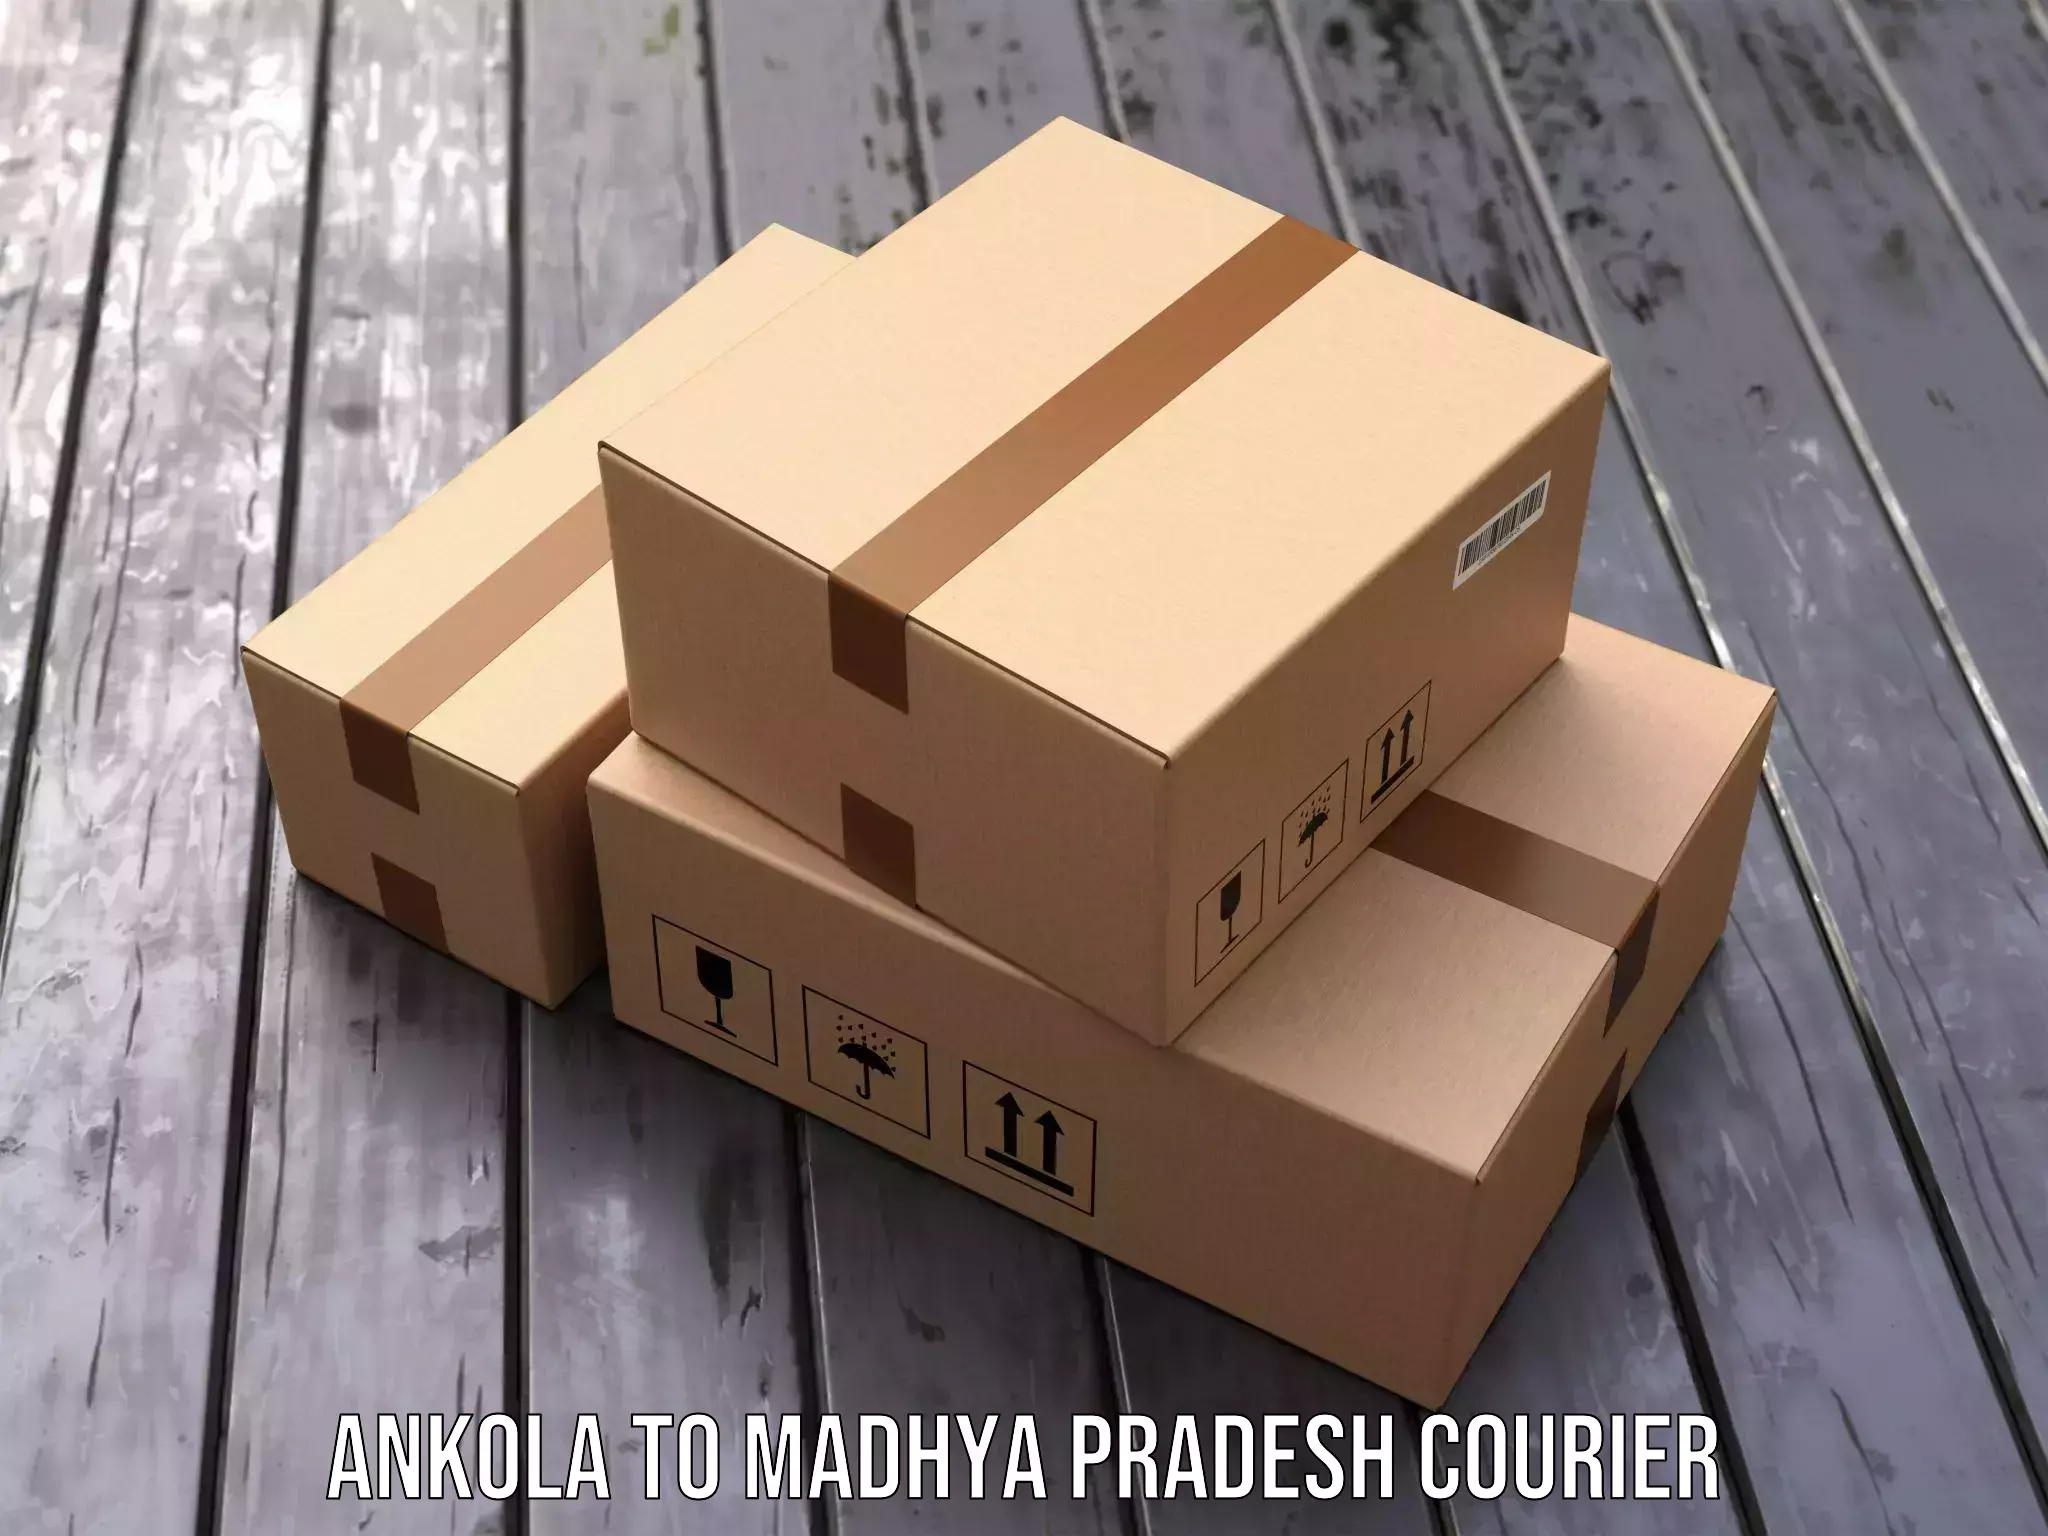 Parcel service for businesses Ankola to IIIT Bhopal